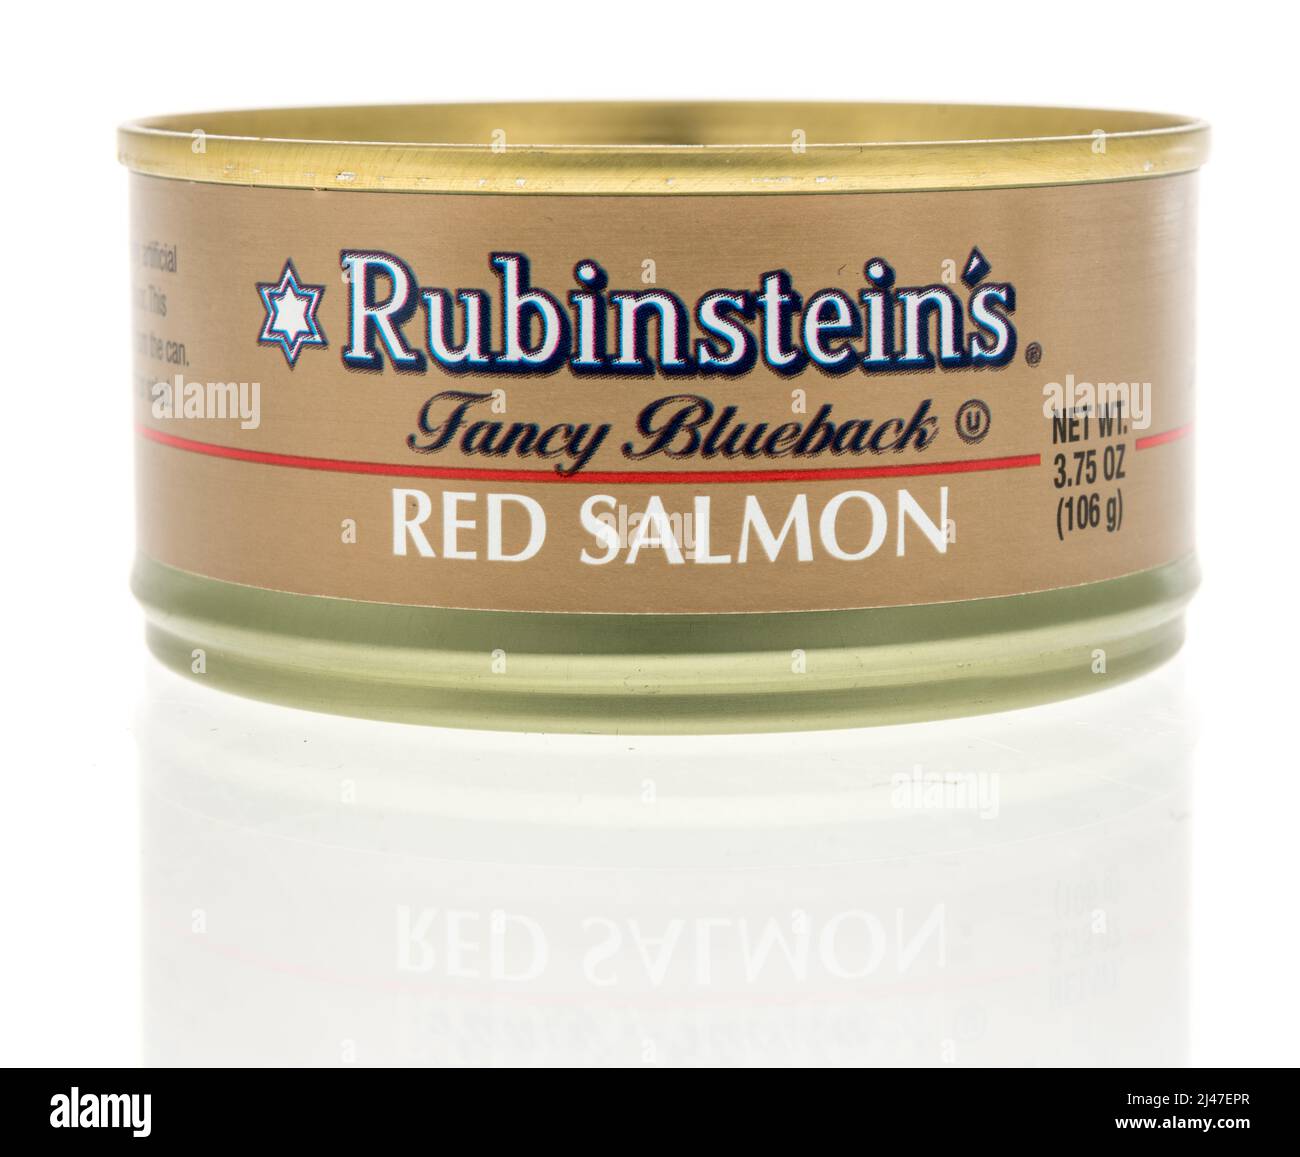 Winneconne, WI -10 April 2022: A can of Rubinsteins fancy blueback red salmon on an isolated background Stock Photo